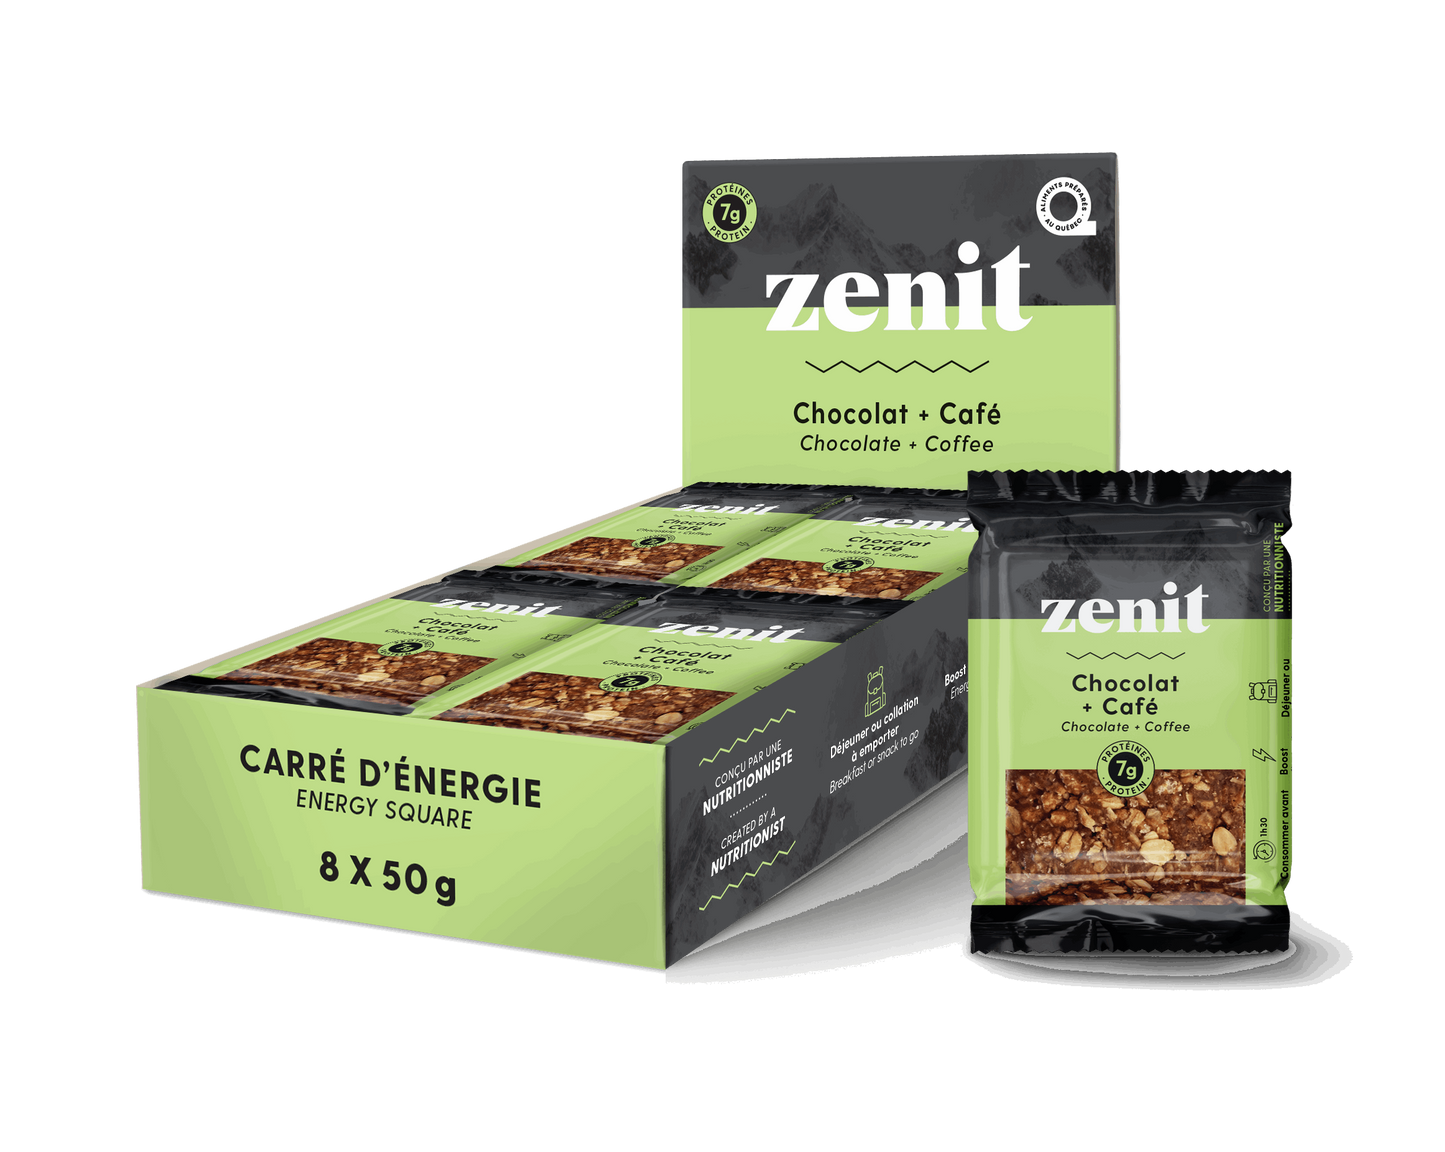 Zenit brand chocolate and coffee nutrition bars displayed